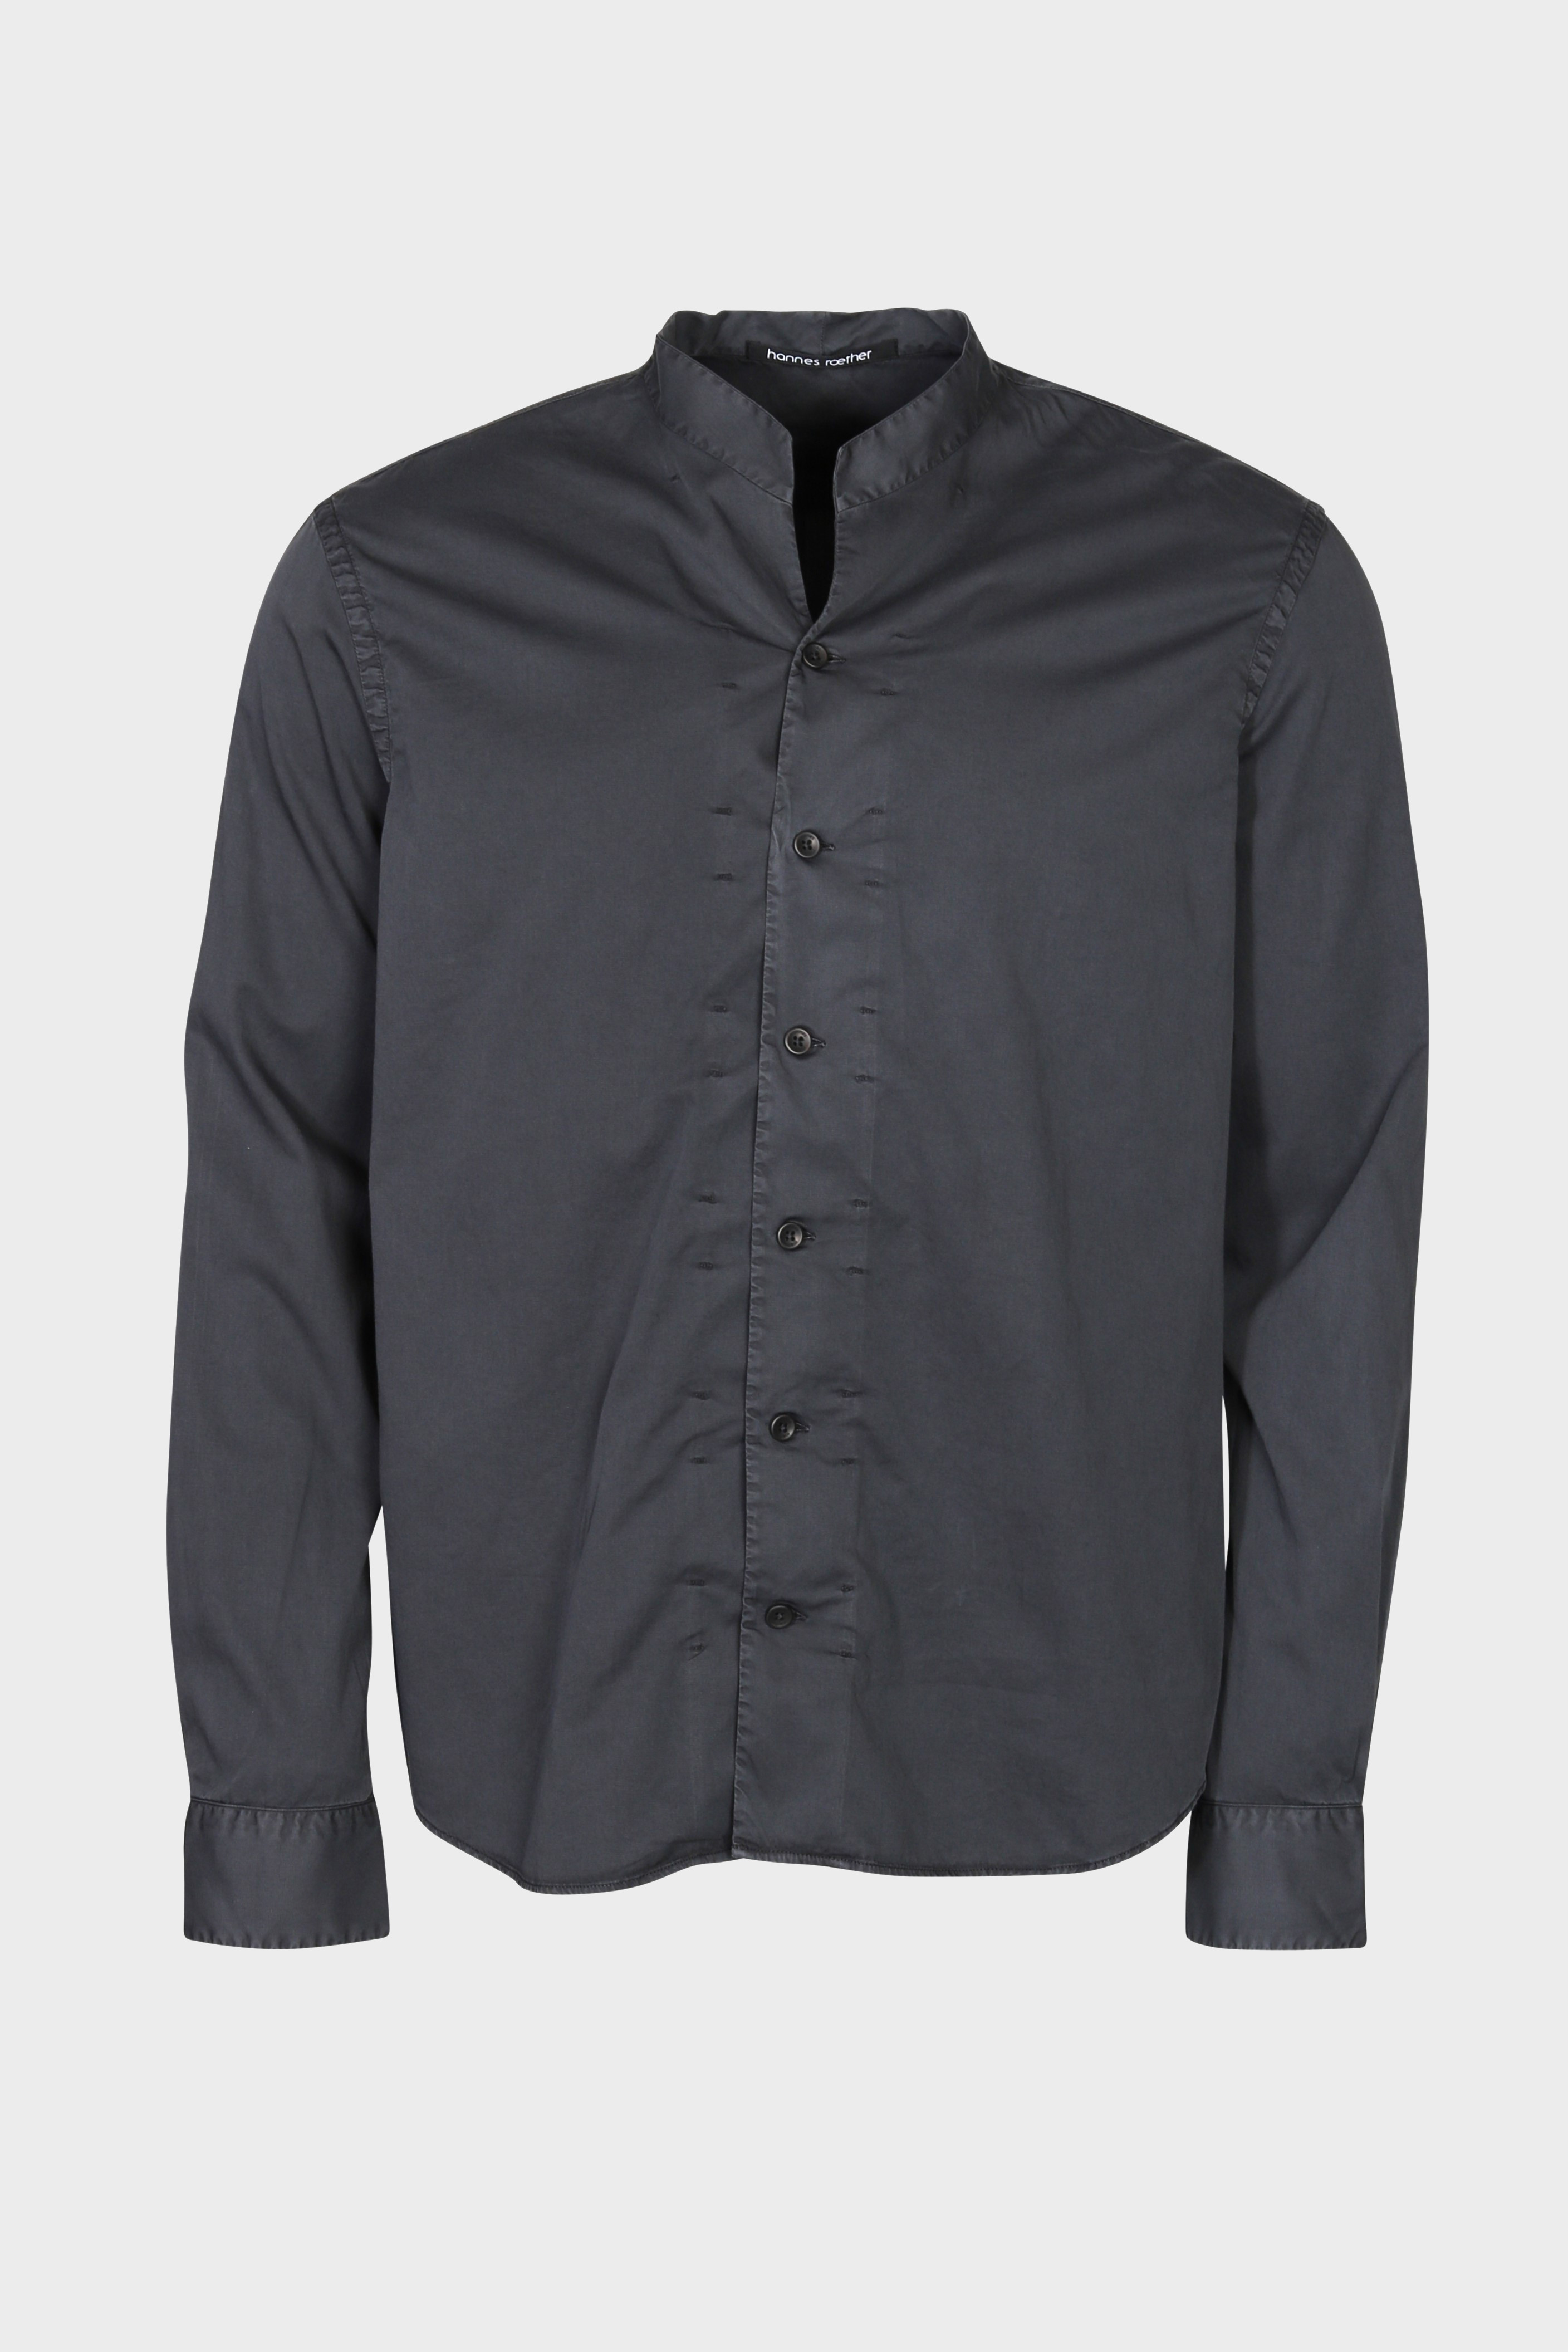 HANNES ROETHER Cotton Shirt in Black L